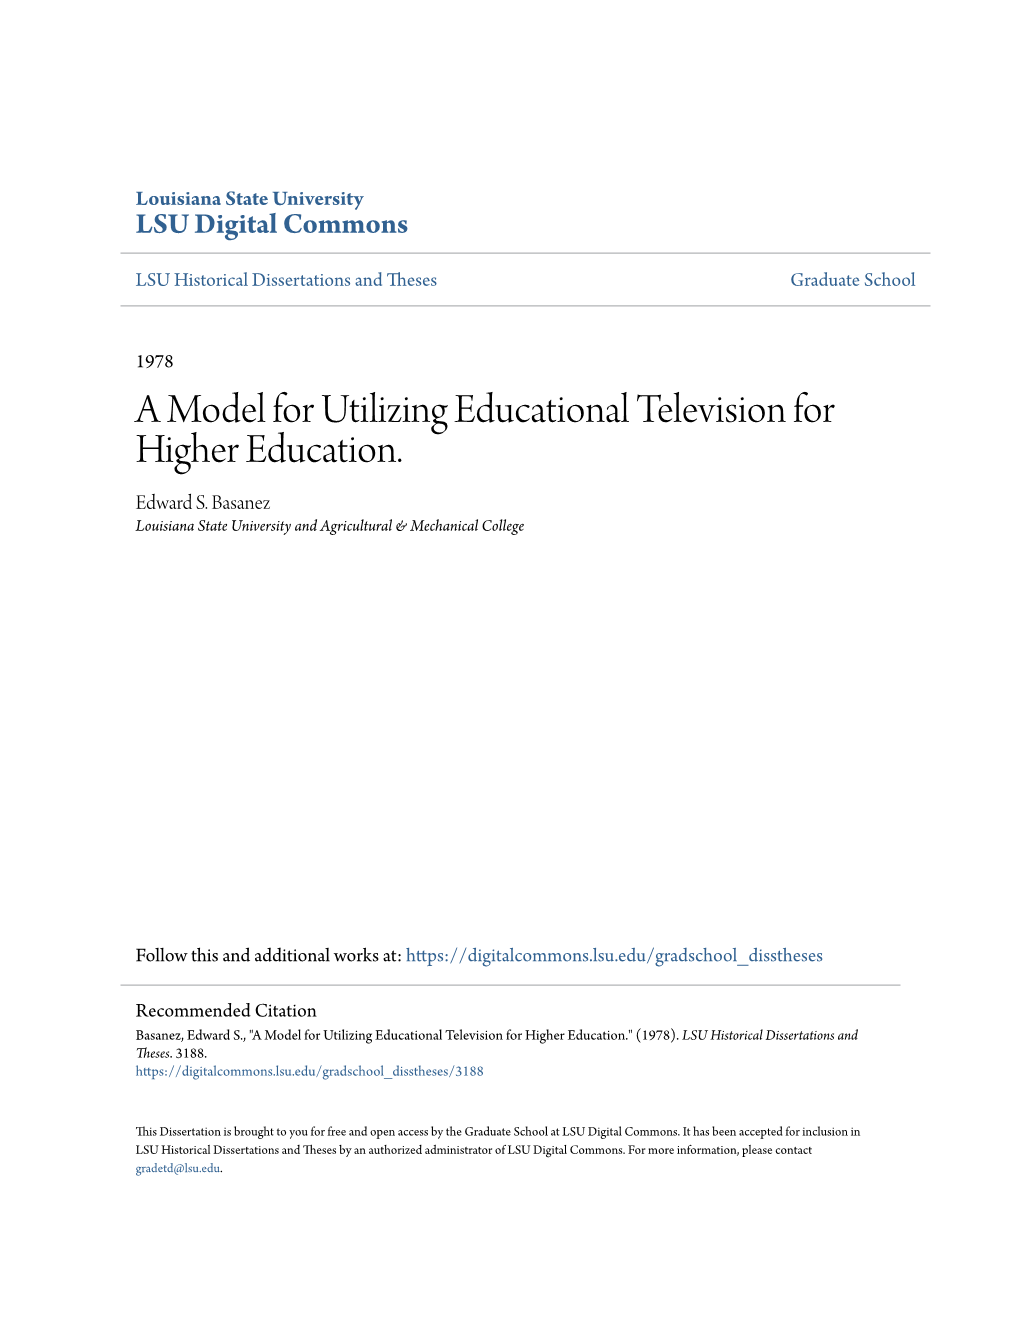 A Model for Utilizing Educational Television for Higher Education. Edward S